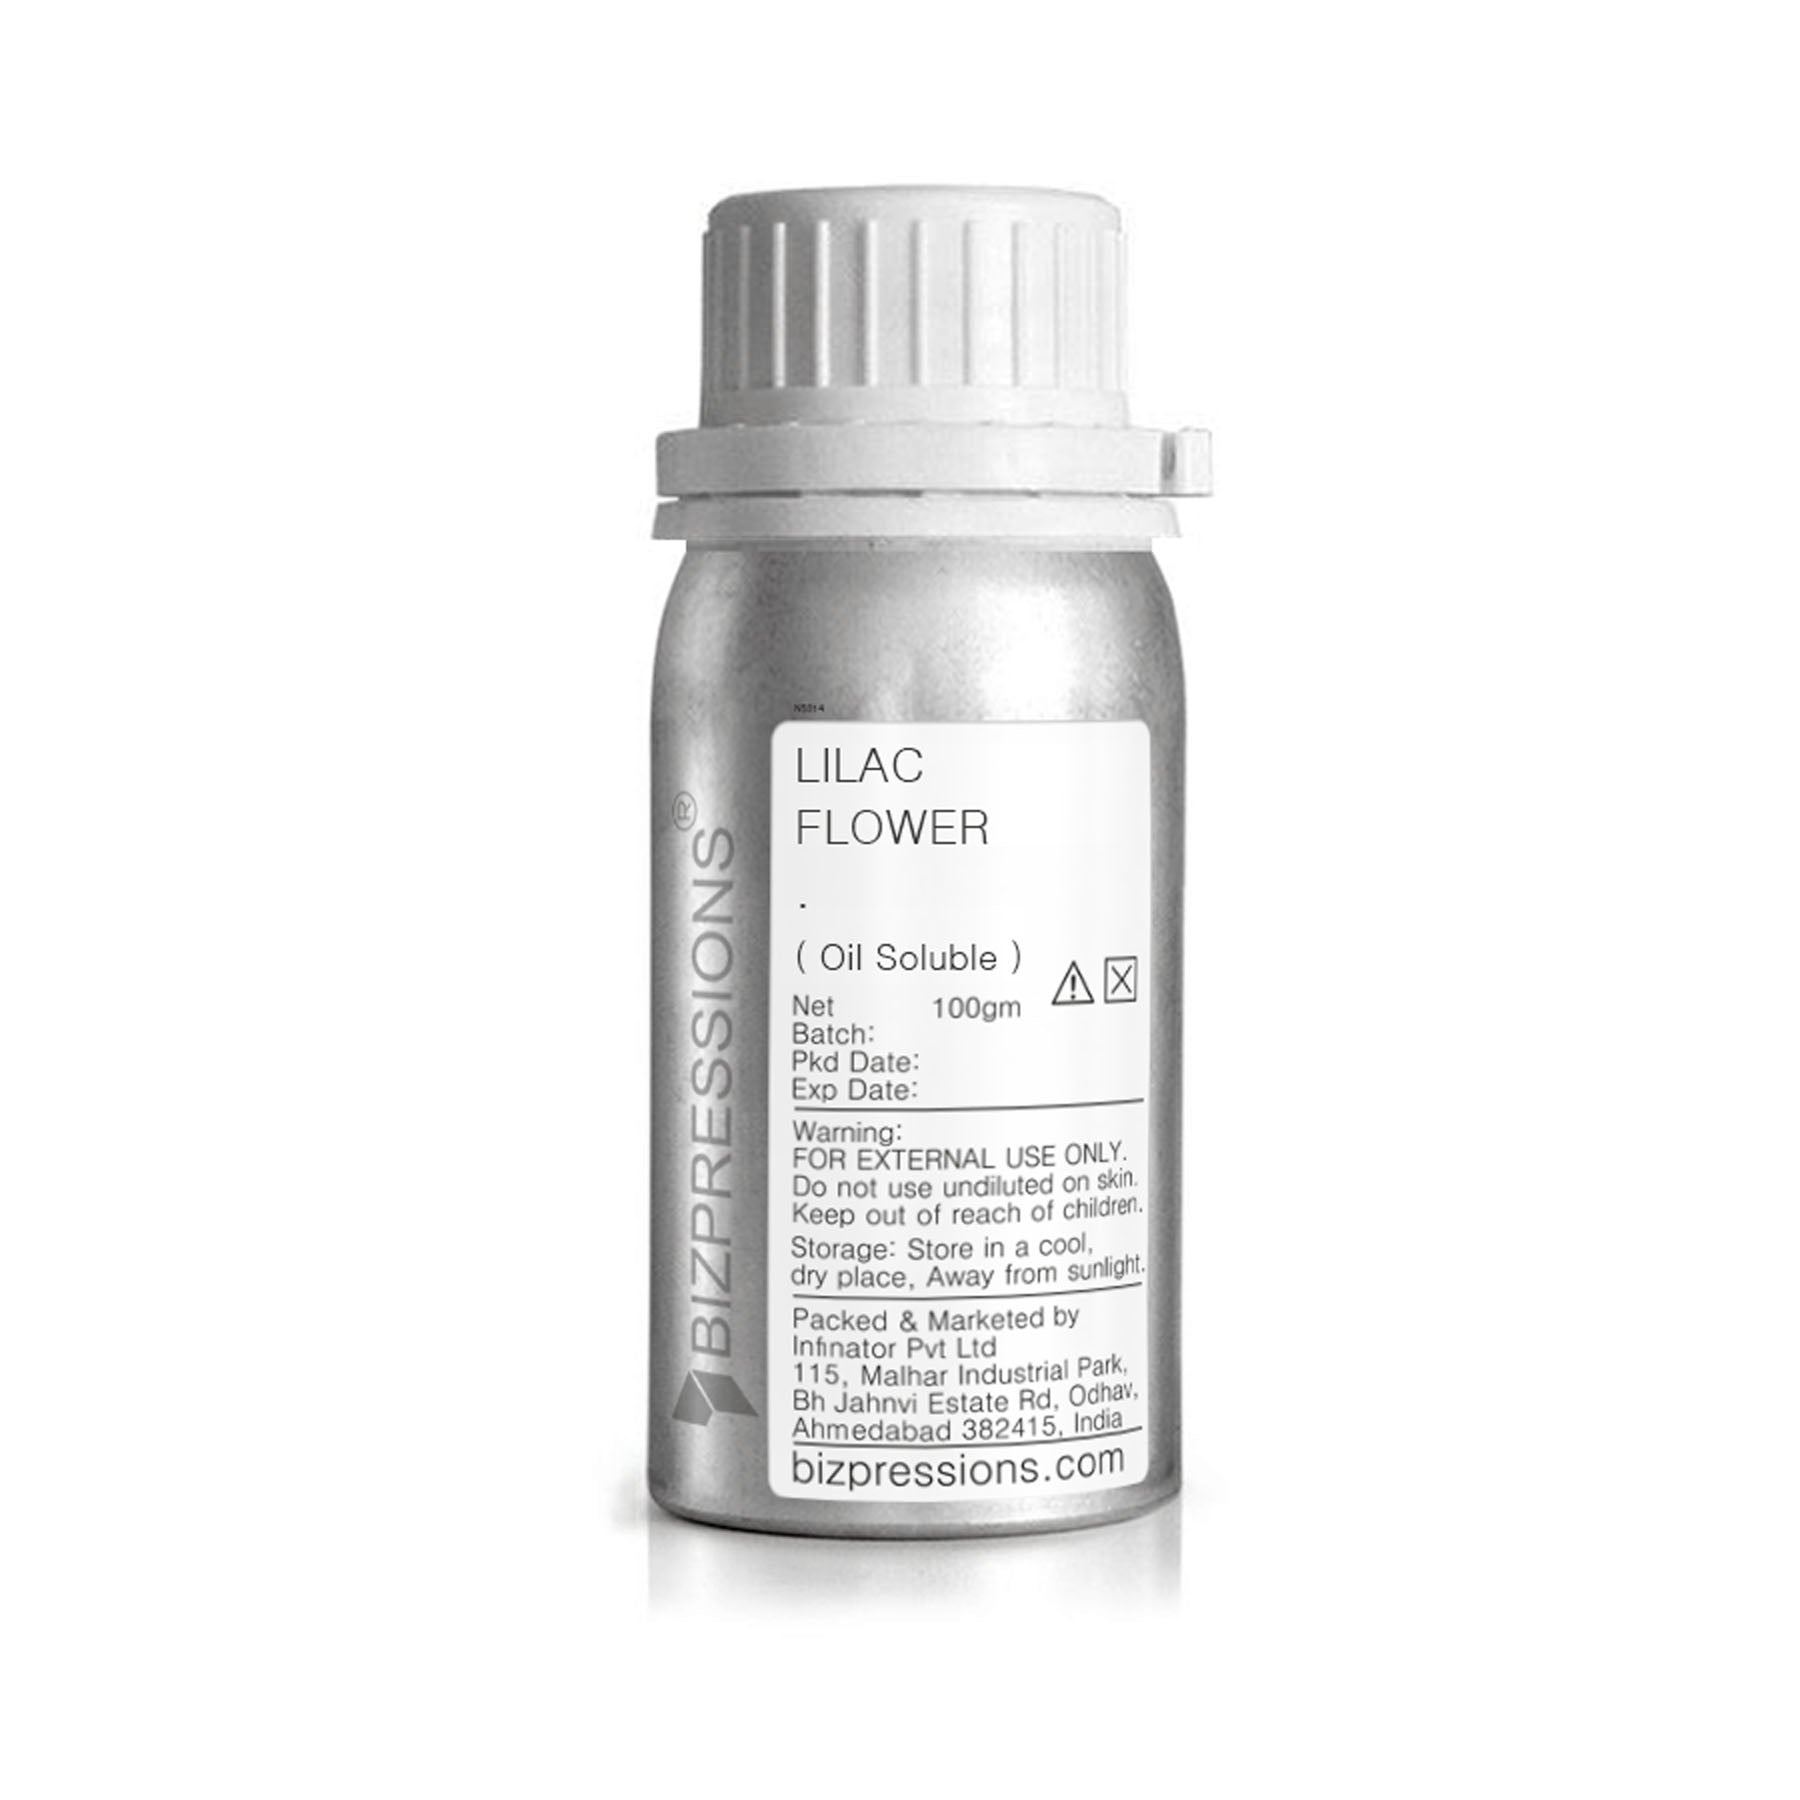 LILAC FLOWER - Fragrance ( Oil Soluble ) - 100 gm